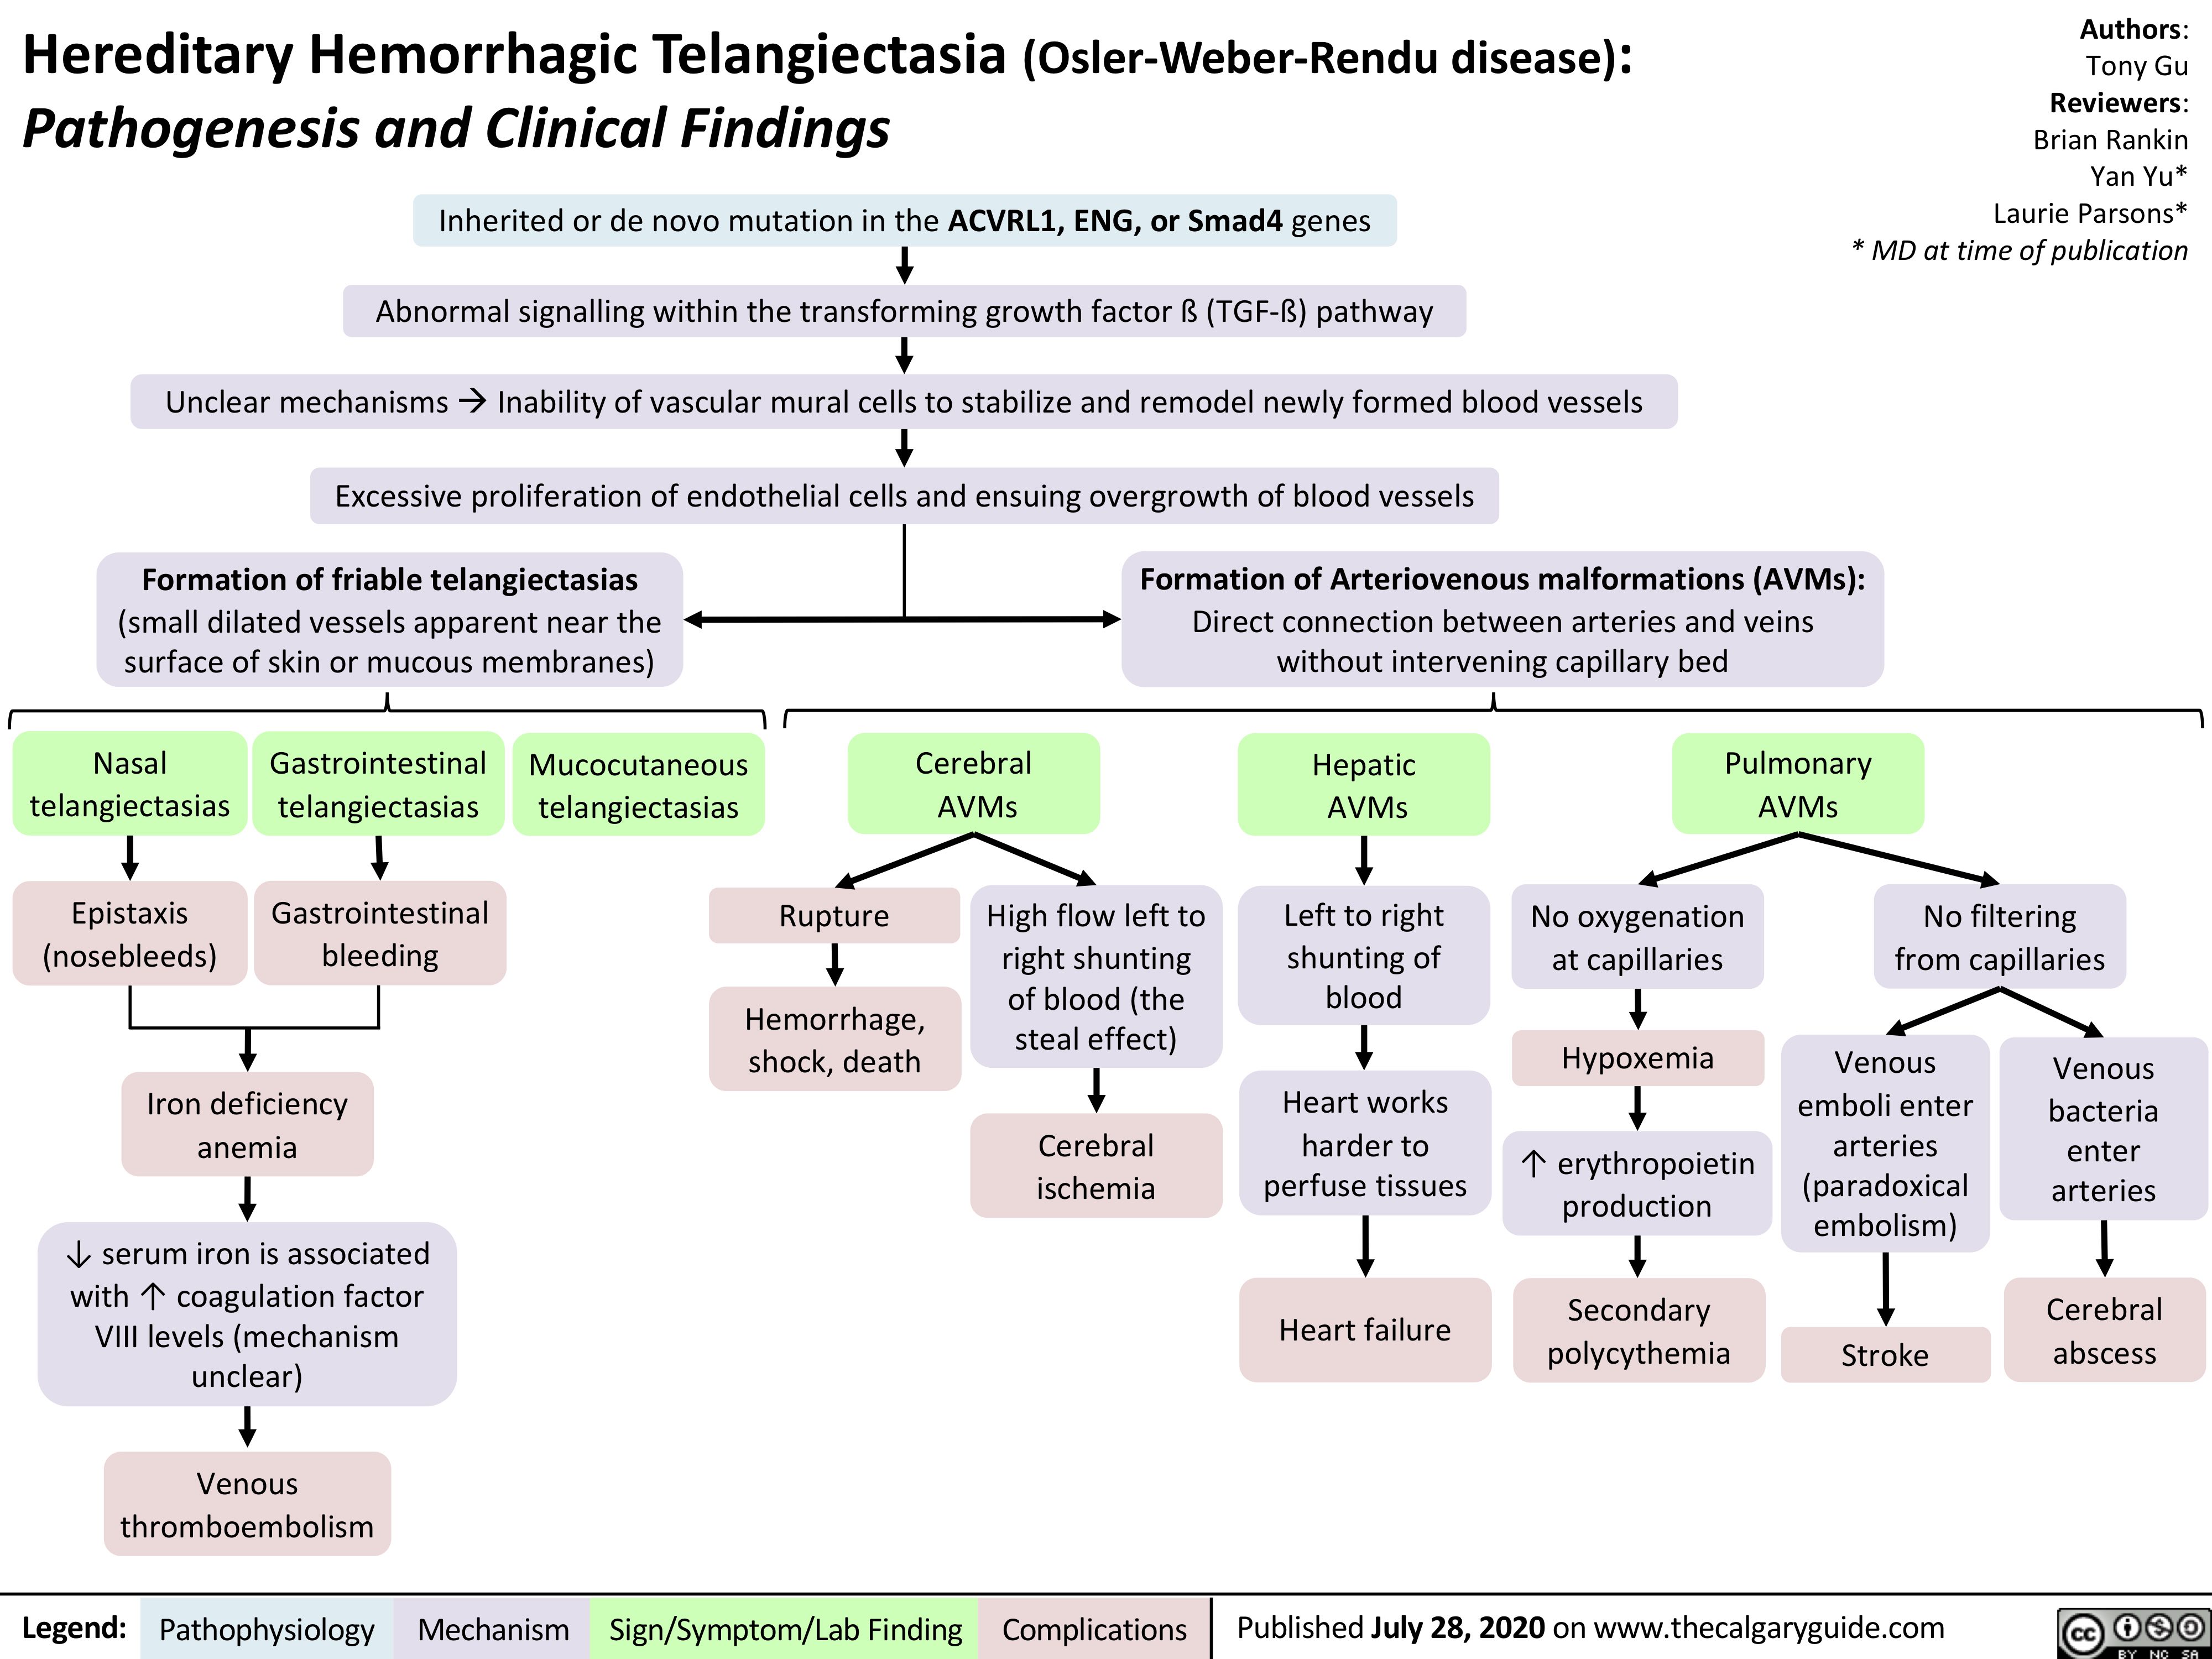 Hereditary Hemorrhagic Telangiectasia (Osler-Weber-Rendu disease):
Pathogenesis and Clinical Findings
Inherited or de novo mutation in the ACVRL1, ENG, or Smad4 genes
Abnormal signalling within the transforming growth factor ß (TGF-ß) pathway
Unclear mechanismsàInability of vascular mural cells to stabilize and remodel newly formed blood vessels
Excessive proliferation of endothelial cells and ensuing overgrowth of blood vessels
Authors: Tony Gu Reviewers: Brian Rankin Yan Yu* Laurie Parsons* * MD at time of publication
          Formation of friable telangiectasias
(small dilated vessels apparent near the surface of skin or mucous membranes)
Formation of Arteriovenous malformations (AVMs):
Direct connection between arteries and veins without intervening capillary bed
        Nasal telangiectasias
Epistaxis (nosebleeds)
Gastrointestinal telangiectasias
Gastrointestinal bleeding
Mucocutaneous telangiectasias
Cerebral AVMs
Hepatic AVMs
Left to right shunting of blood
Heart works harder to perfuse tissues
Heart failure
Pulmonary AVMs
              Rupture
High flow left to right shunting of blood (the steal effect)
Cerebral ischemia
No oxygenation at capillaries
Hypoxemia
↑ erythropoietin production
Secondary polycythemia
No filtering from capillaries
      Hemorrhage, shock, death
Venous emboli enter arteries (paradoxical embolism)
Stroke
Venous bacteria enter arteries
Cerebral abscess
       Iron deficiency anemia
↓ serum iron is associated with ↑ coagulation factor VIII levels (mechanism unclear)
Venous thromboembolism
               Legend:
 Pathophysiology
Mechanism
Sign/Symptom/Lab Finding
  Complications
Published July 28, 2020 on www.thecalgaryguide.com
    